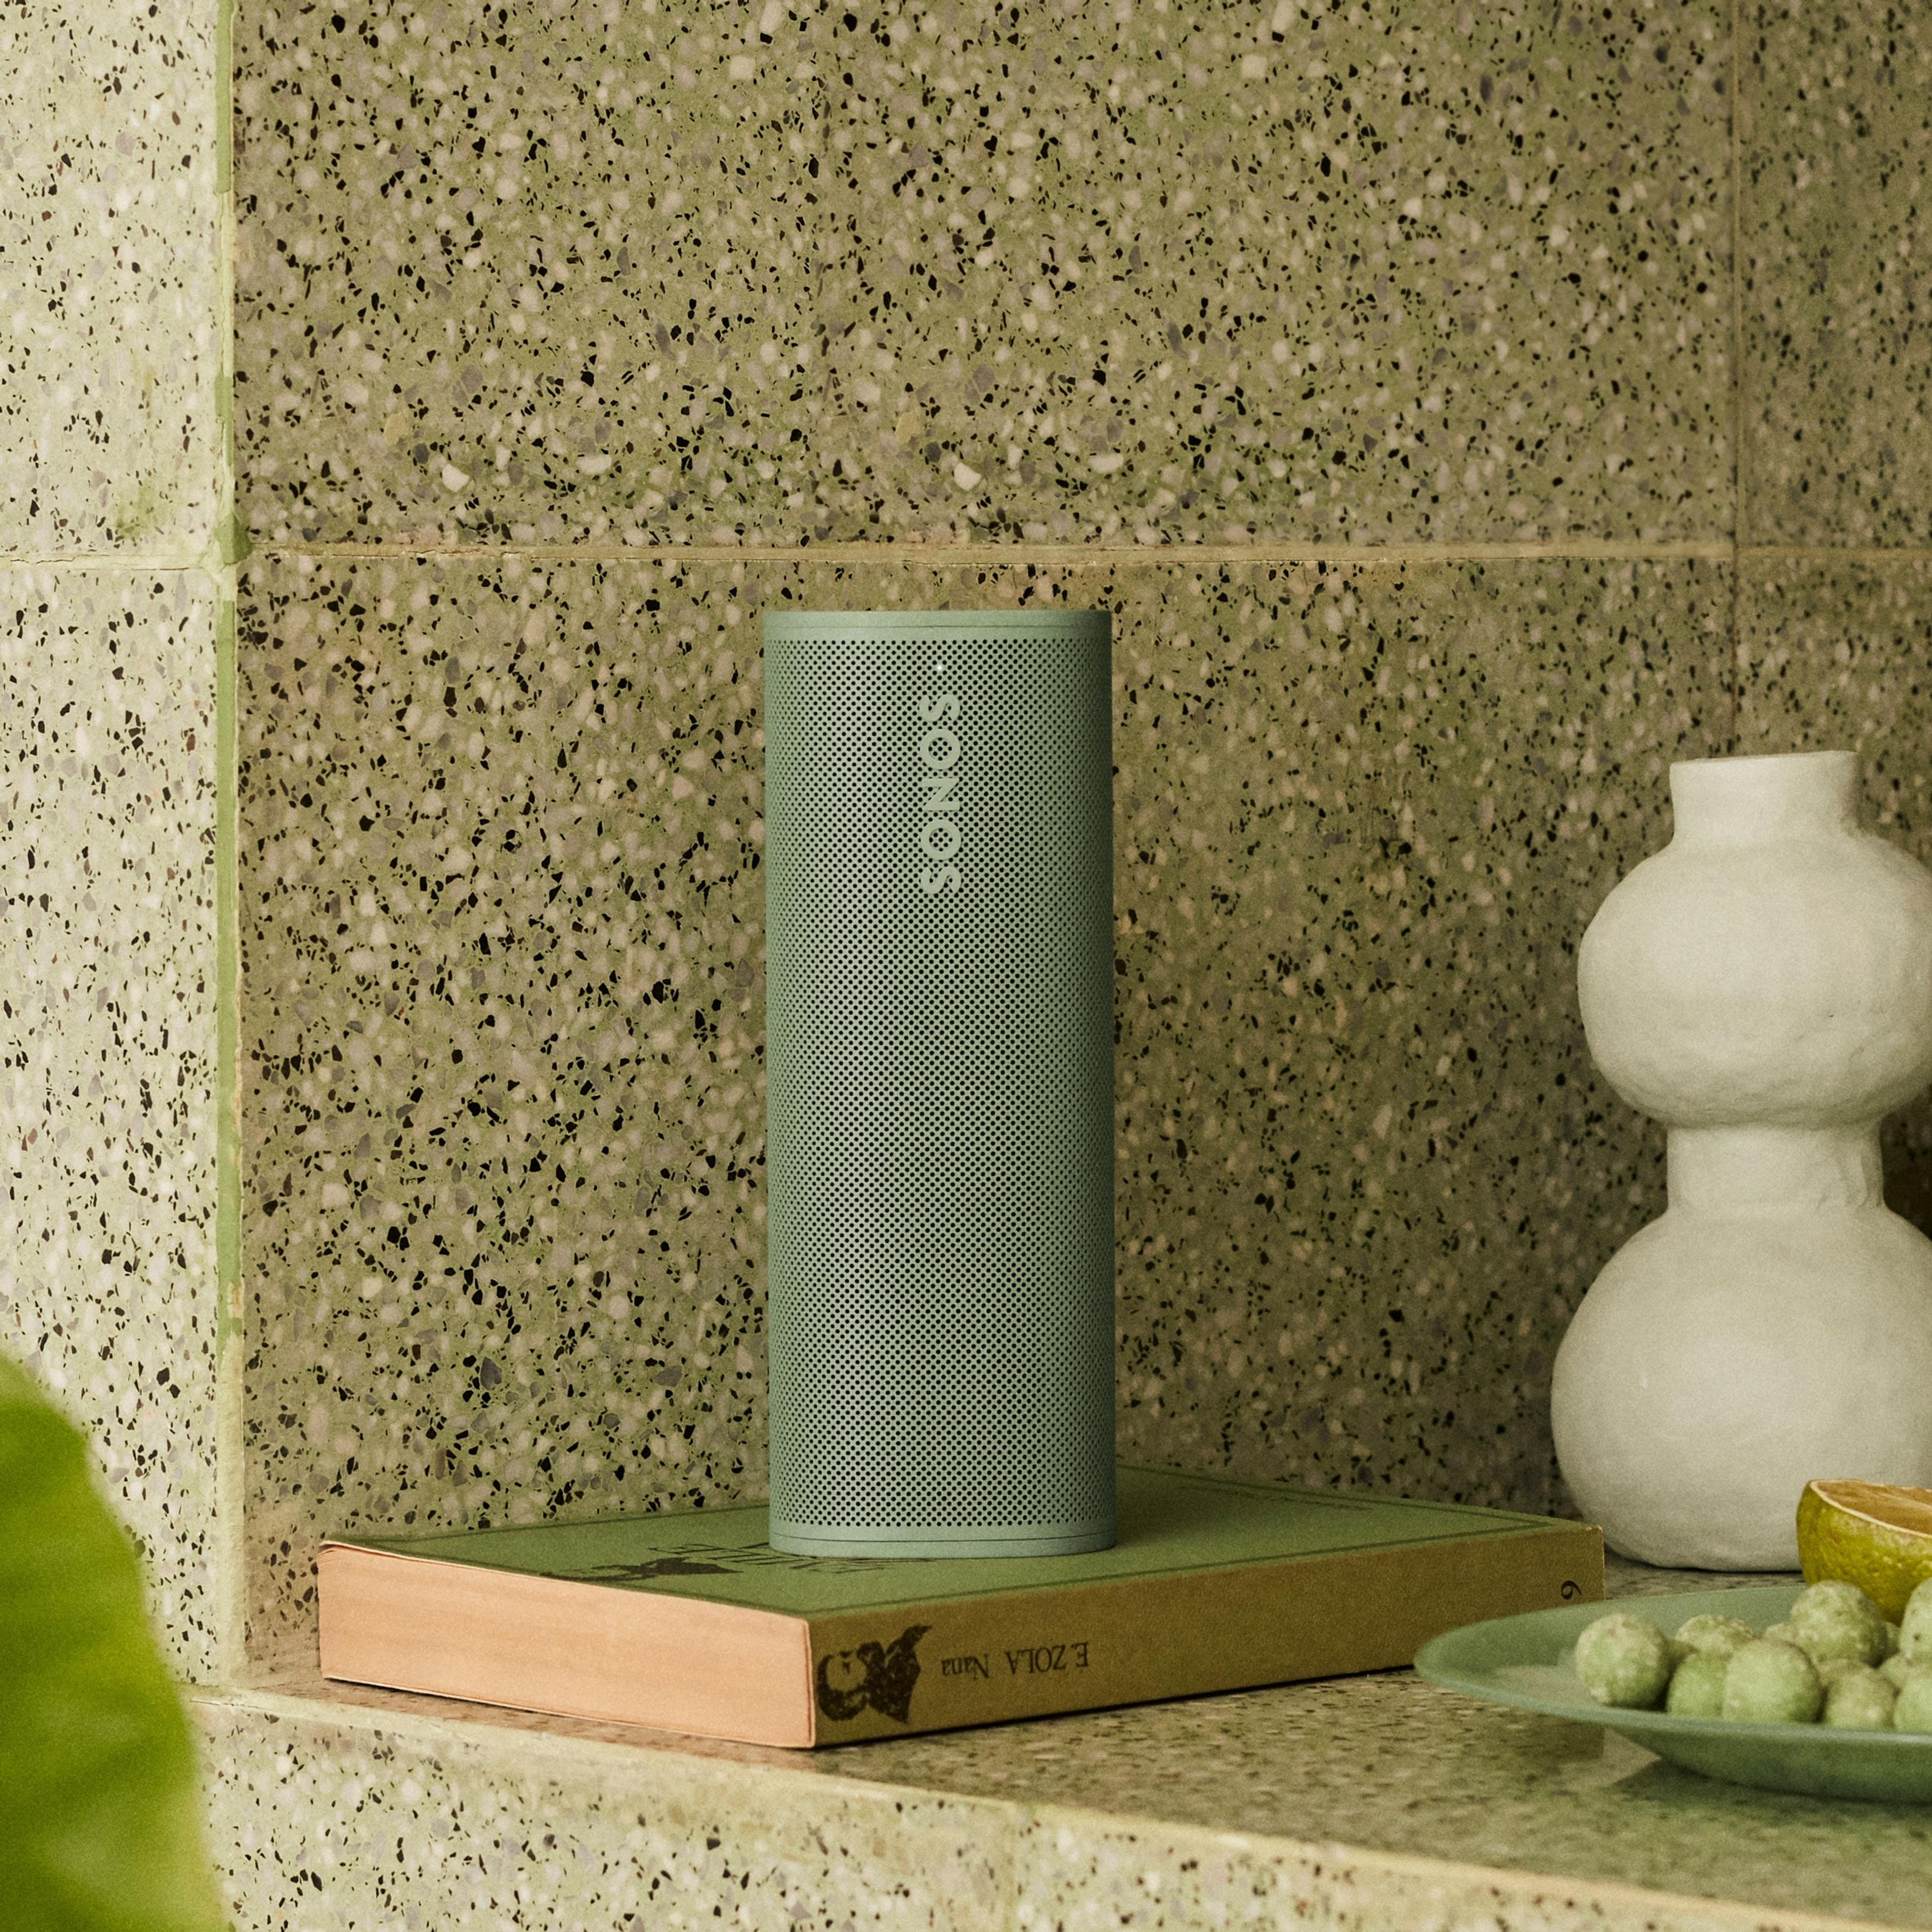 Sonos Roam 2 in Olive on top of a book and next to a vase